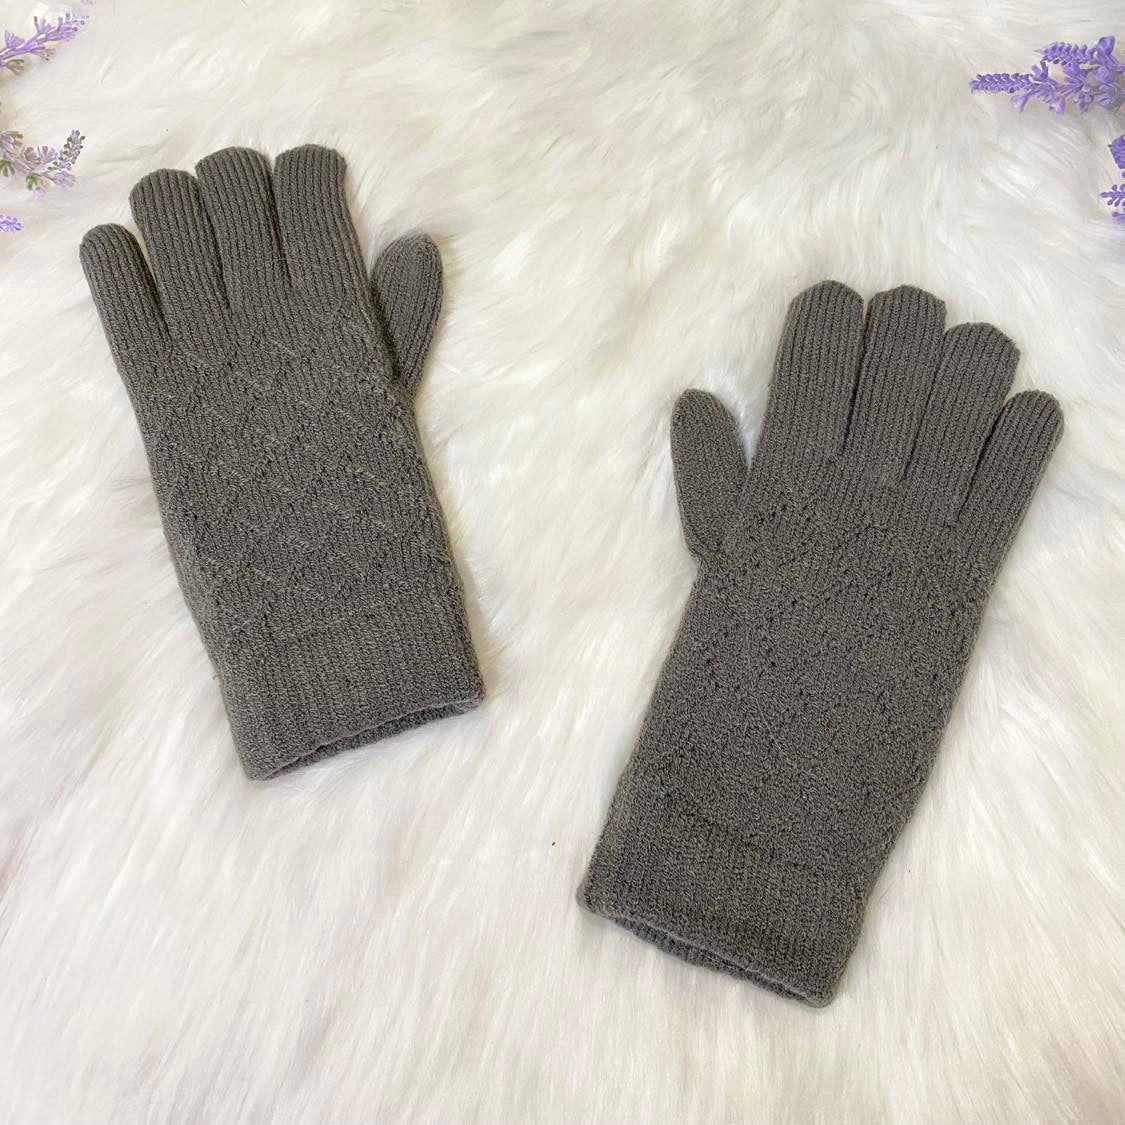 Hand Knit Unisex Adult  Gloves with Fleece Lining